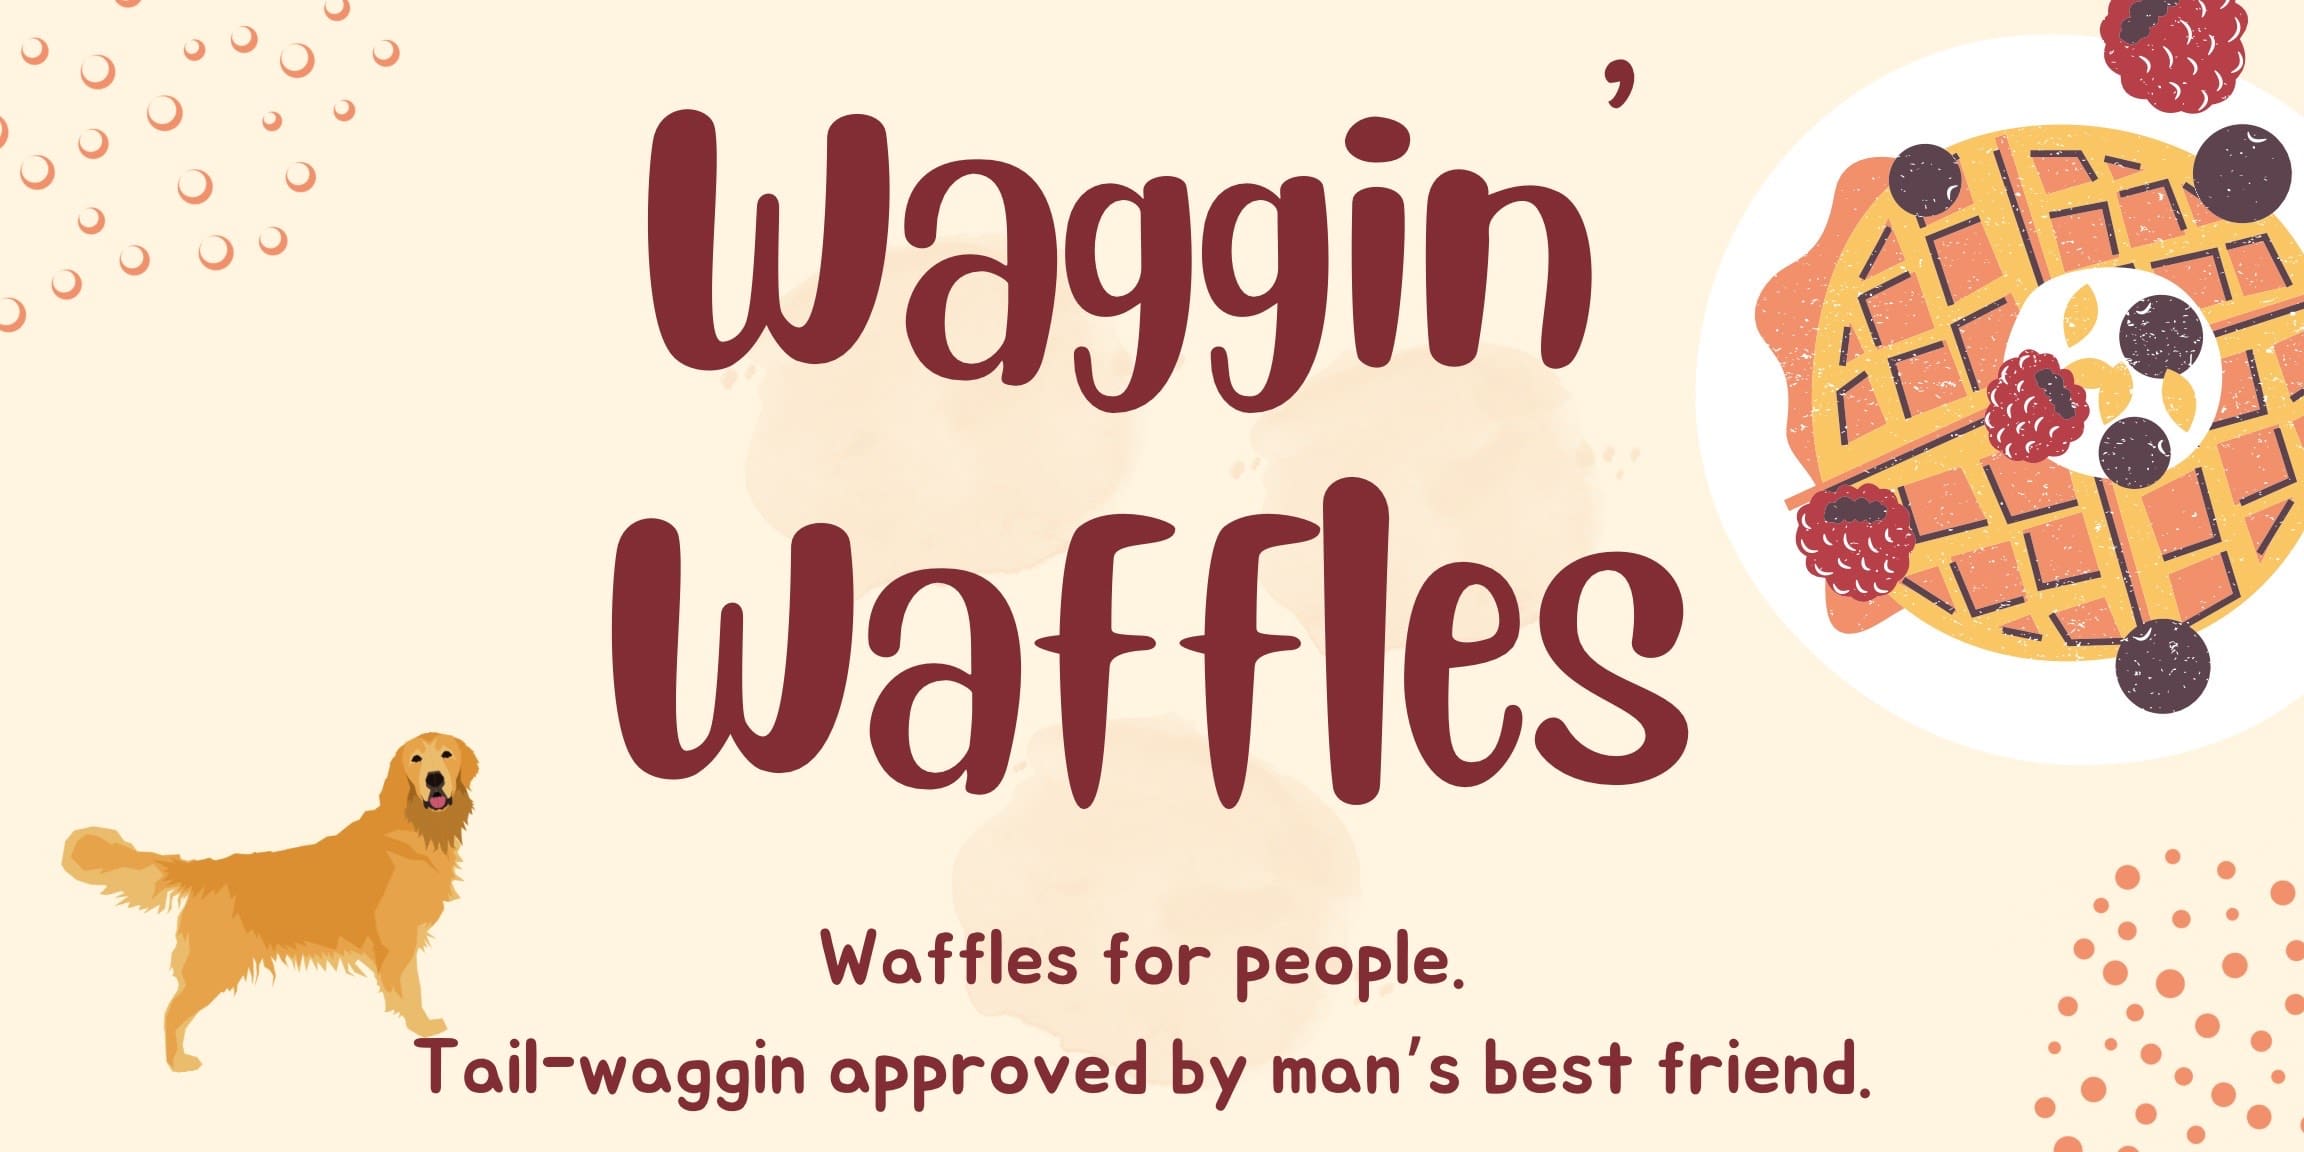 Waggin Waffles. Waffles for people. Picture of waffles and a dog